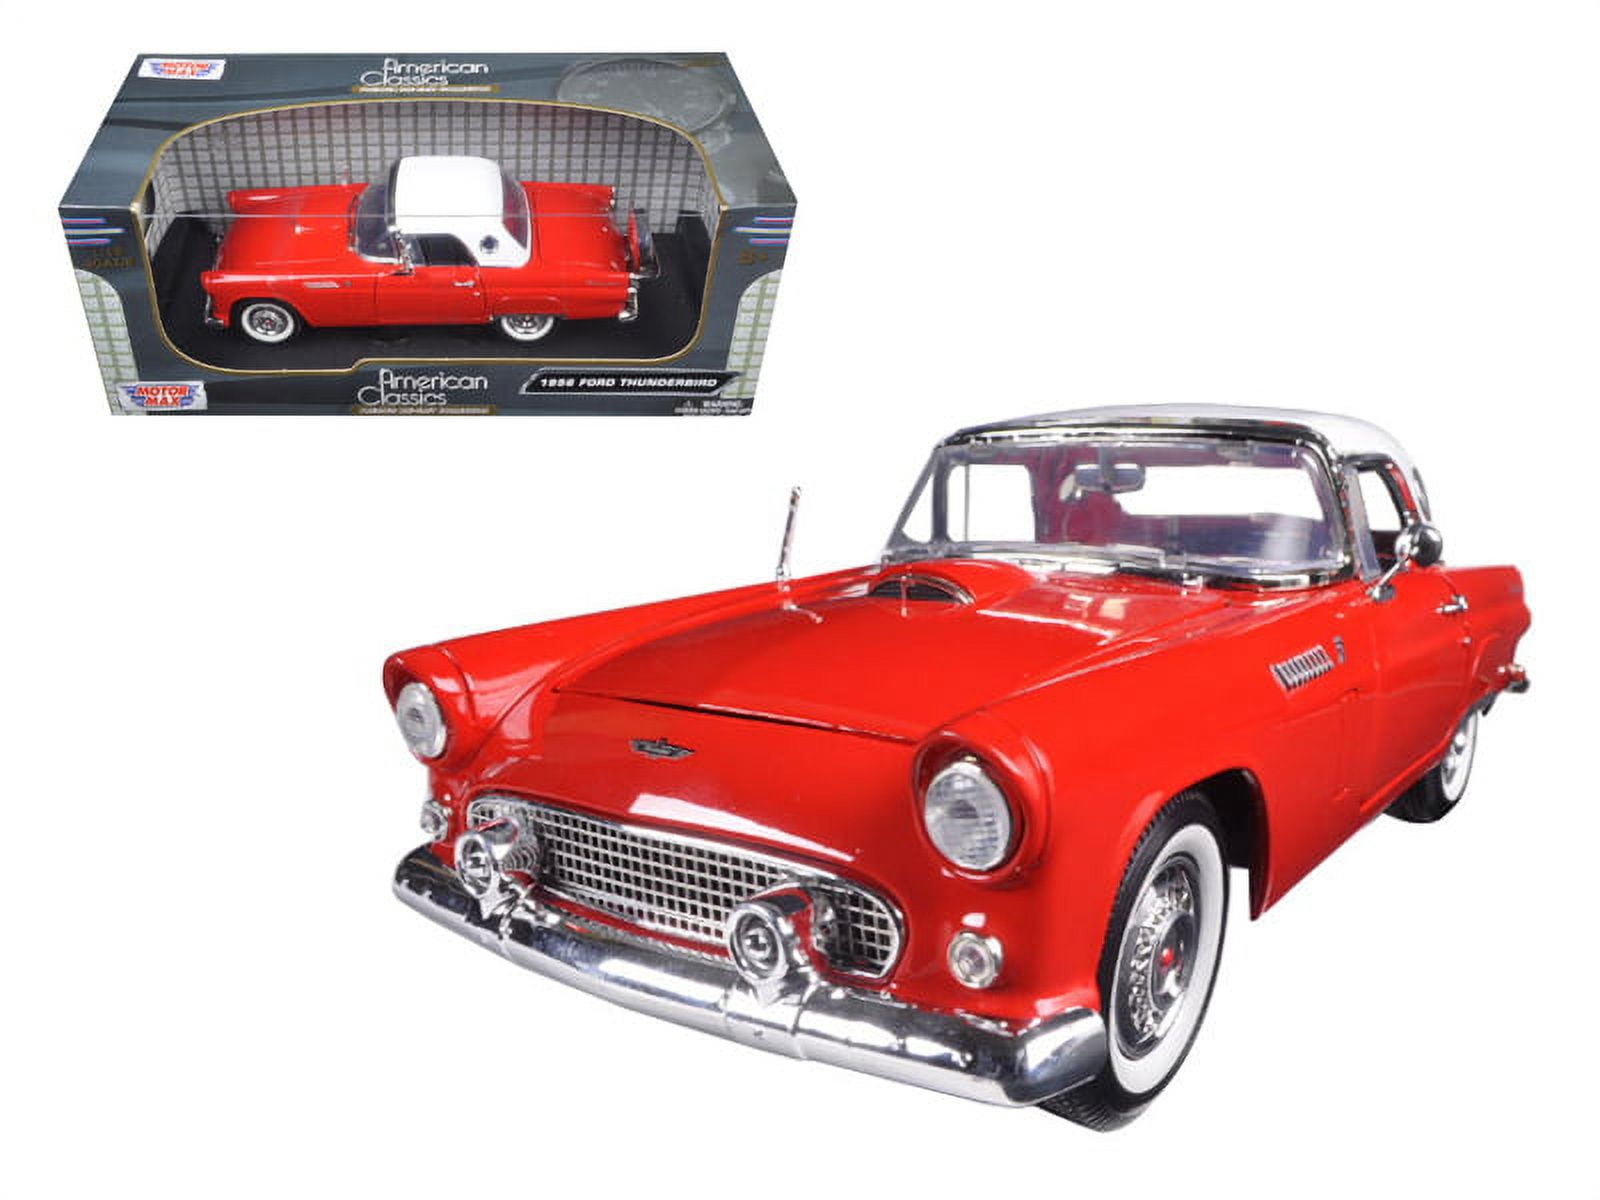 1956 Ford Thunderbird Hard Top Red 1/18 Diecast Model Car by Motormax